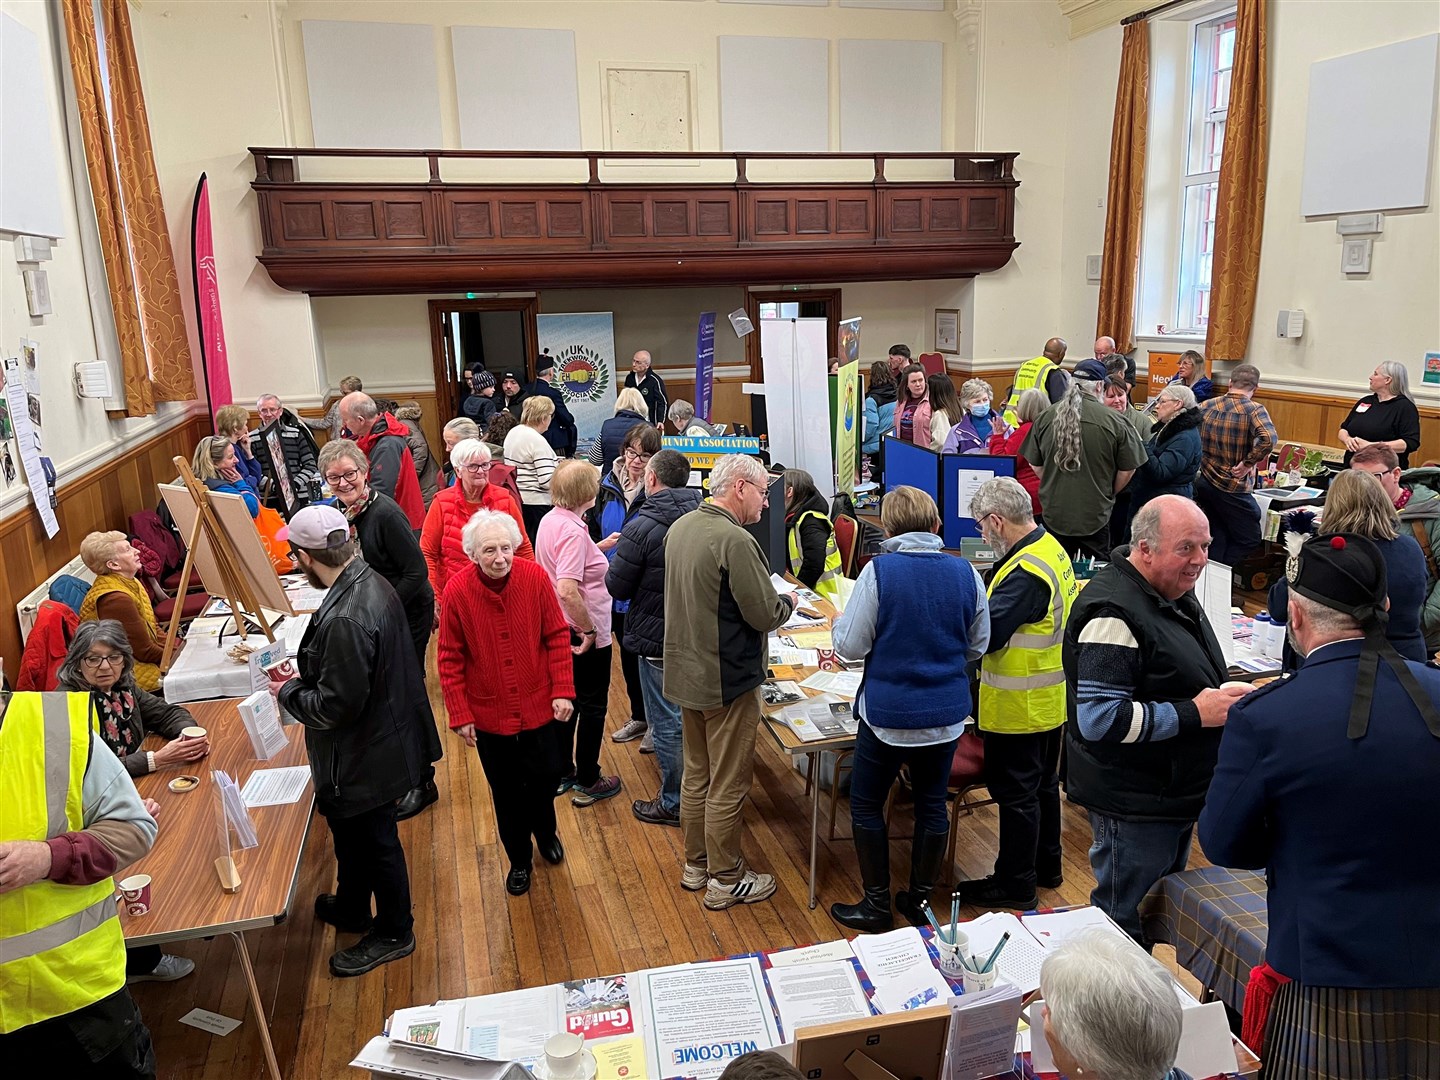 View of the crowds learning about the resources and services serving Aberlour and the surrounding area.